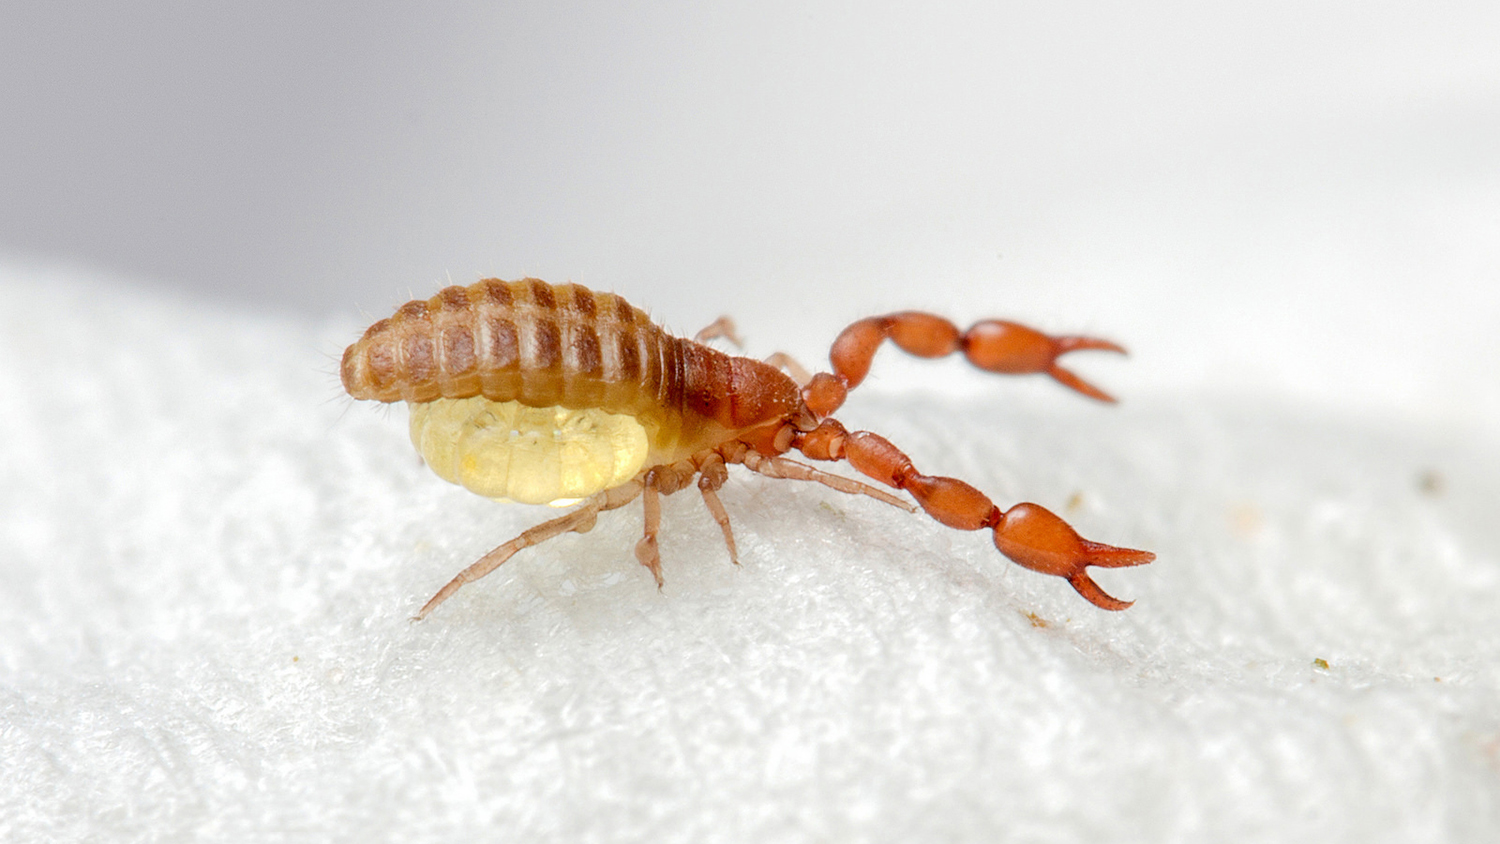 Pseudoscorpion with egg sack on a piece of white fabric.